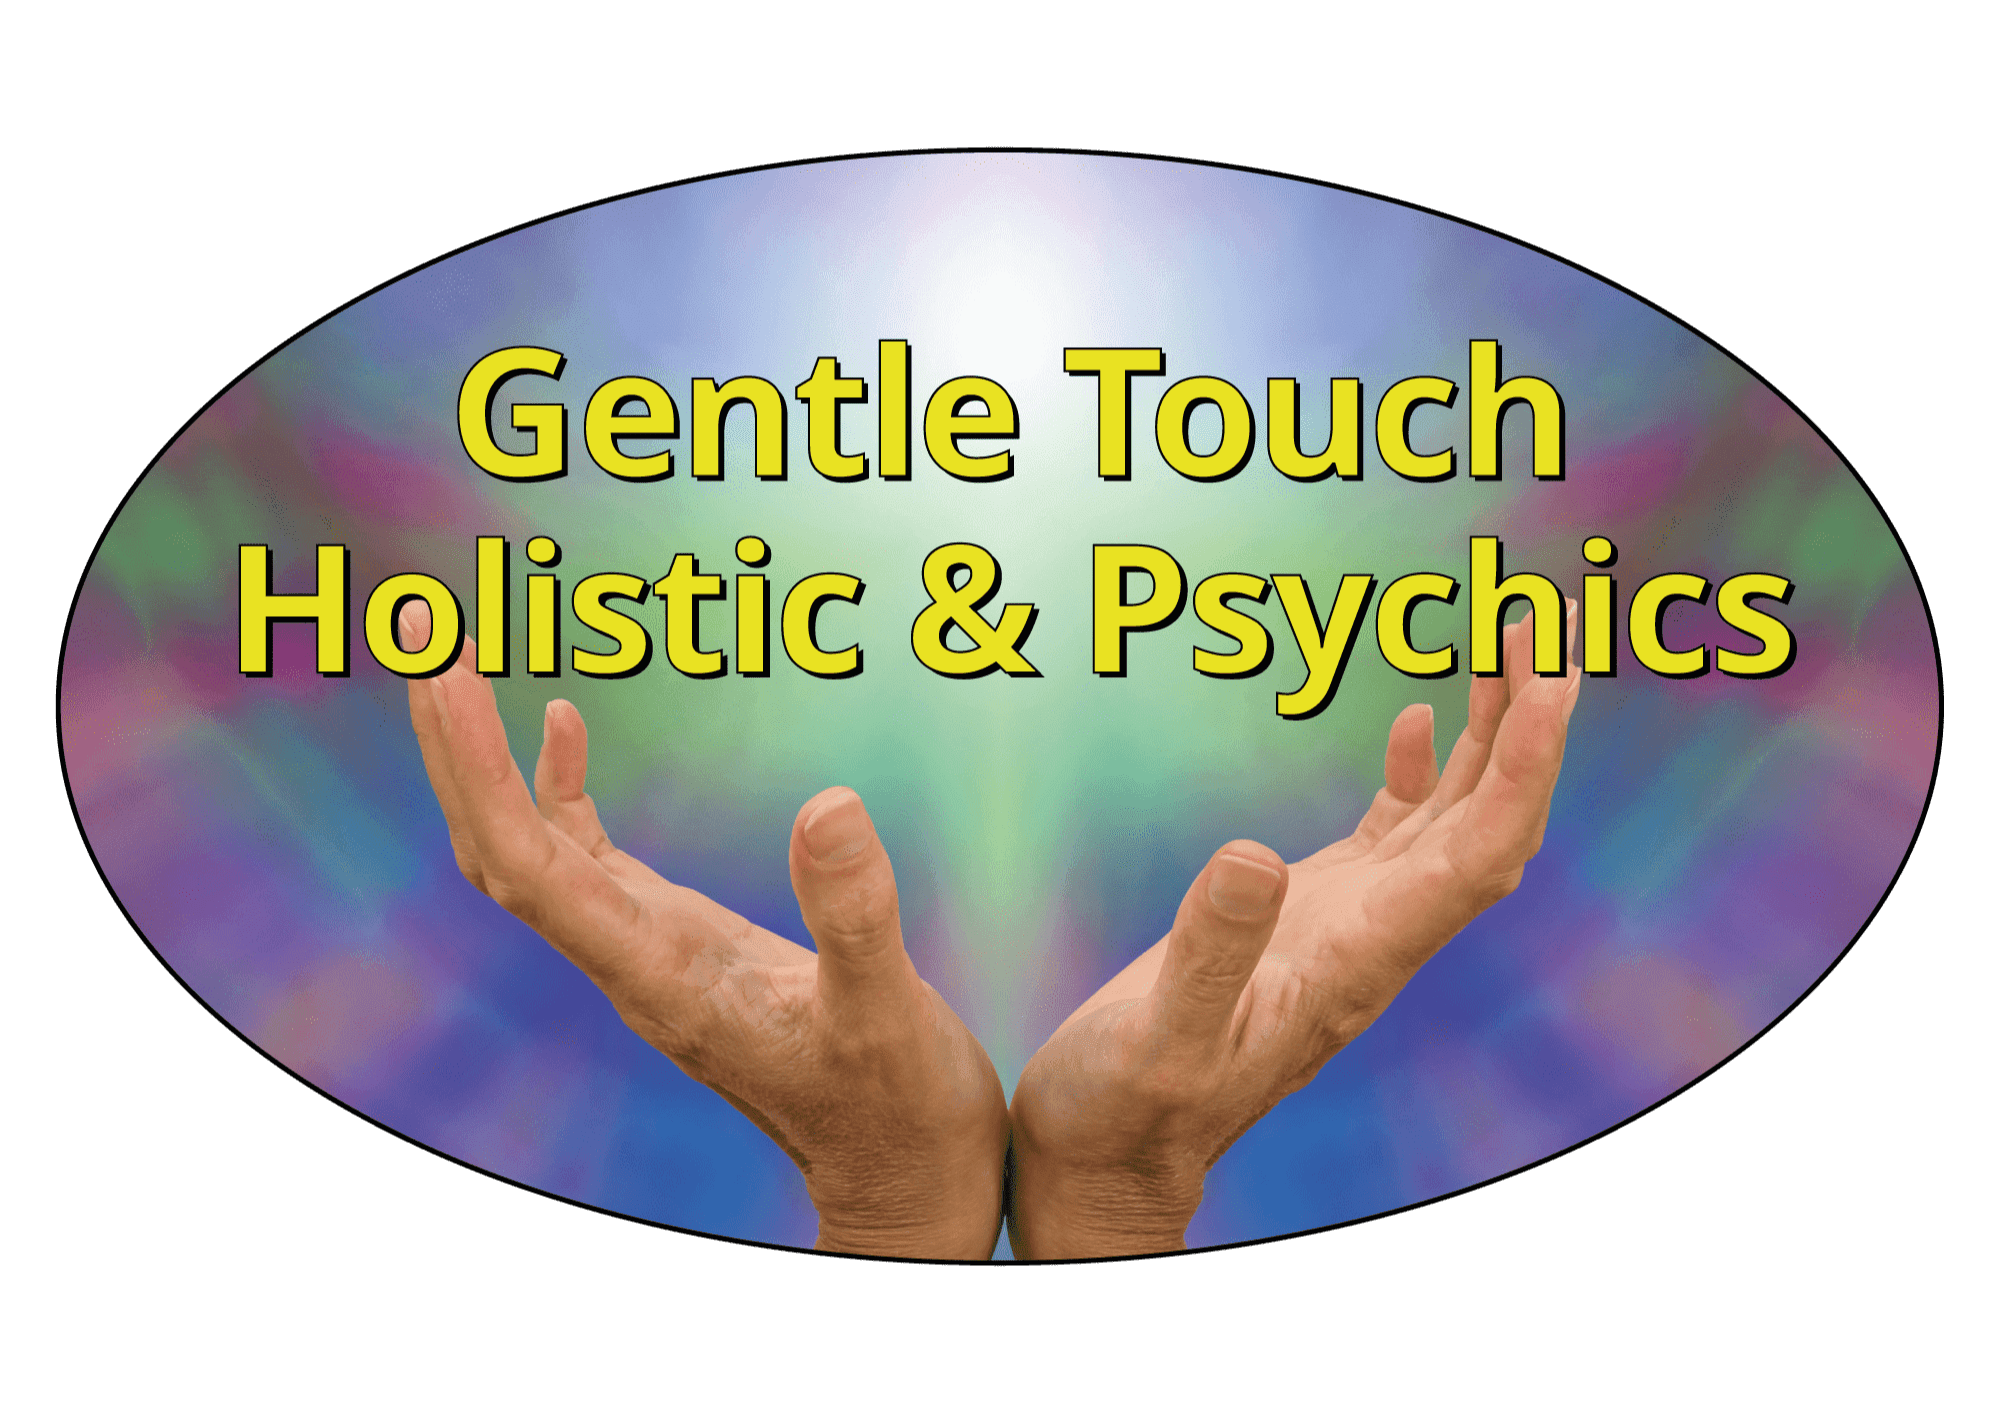 Gentle Touch Holistic & Psychics